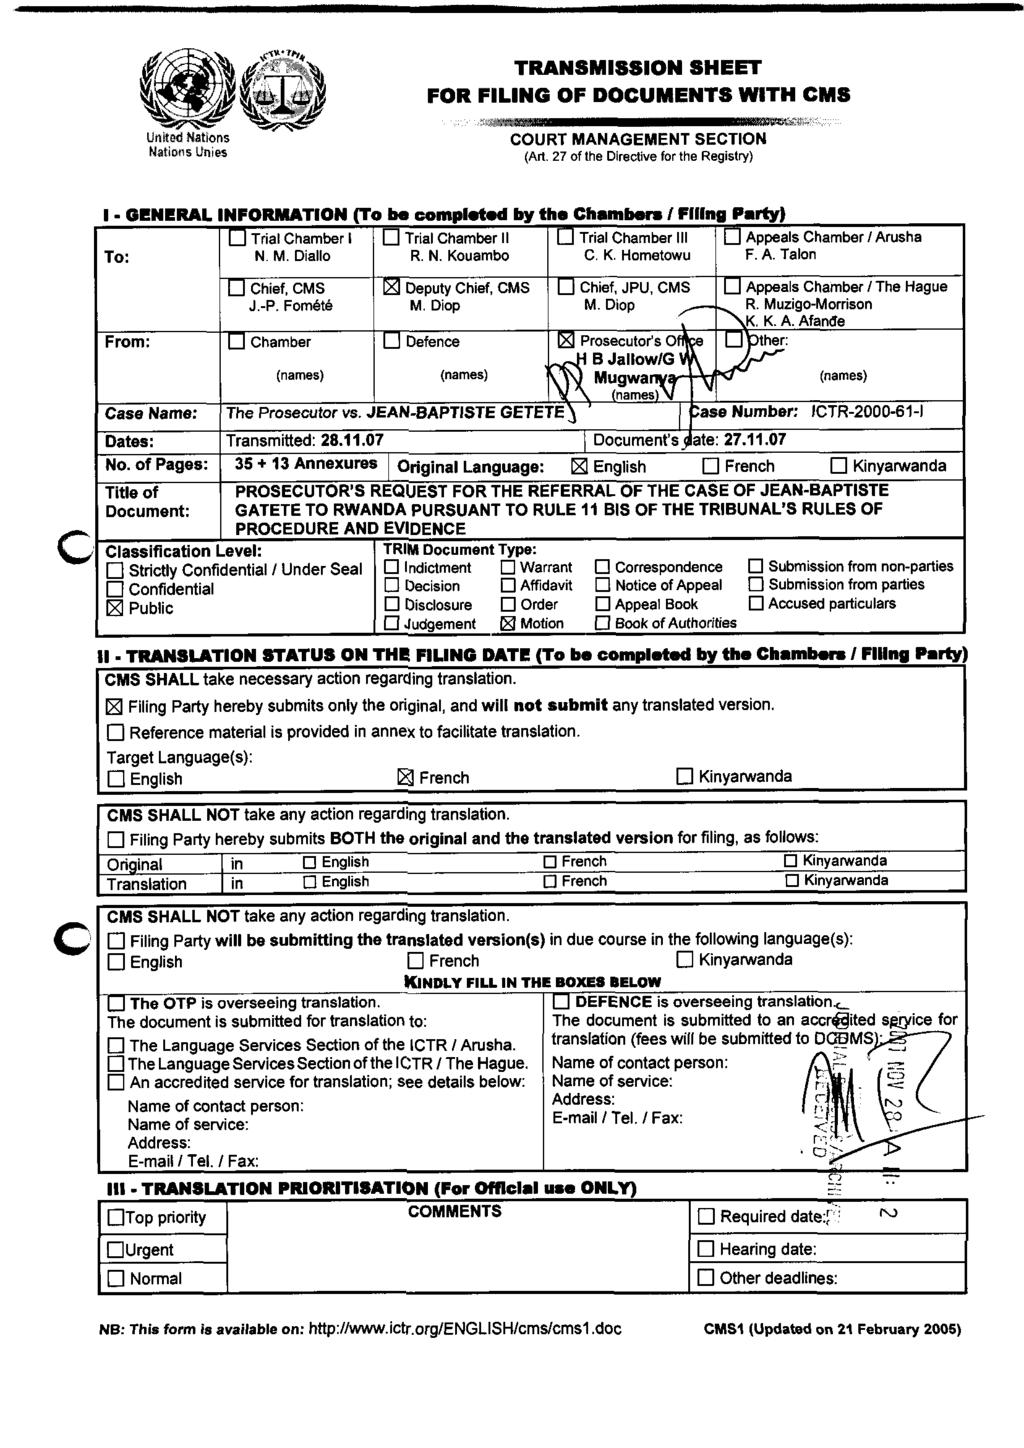 Unned Natlons Nat~ons Un~es TRANSMISSION SHEET FOR FILING OF DOCUMENTS WITH CMS COURT MANAGEMENT SECTION (An 27 of the Dlrectwe for the Registry) ".